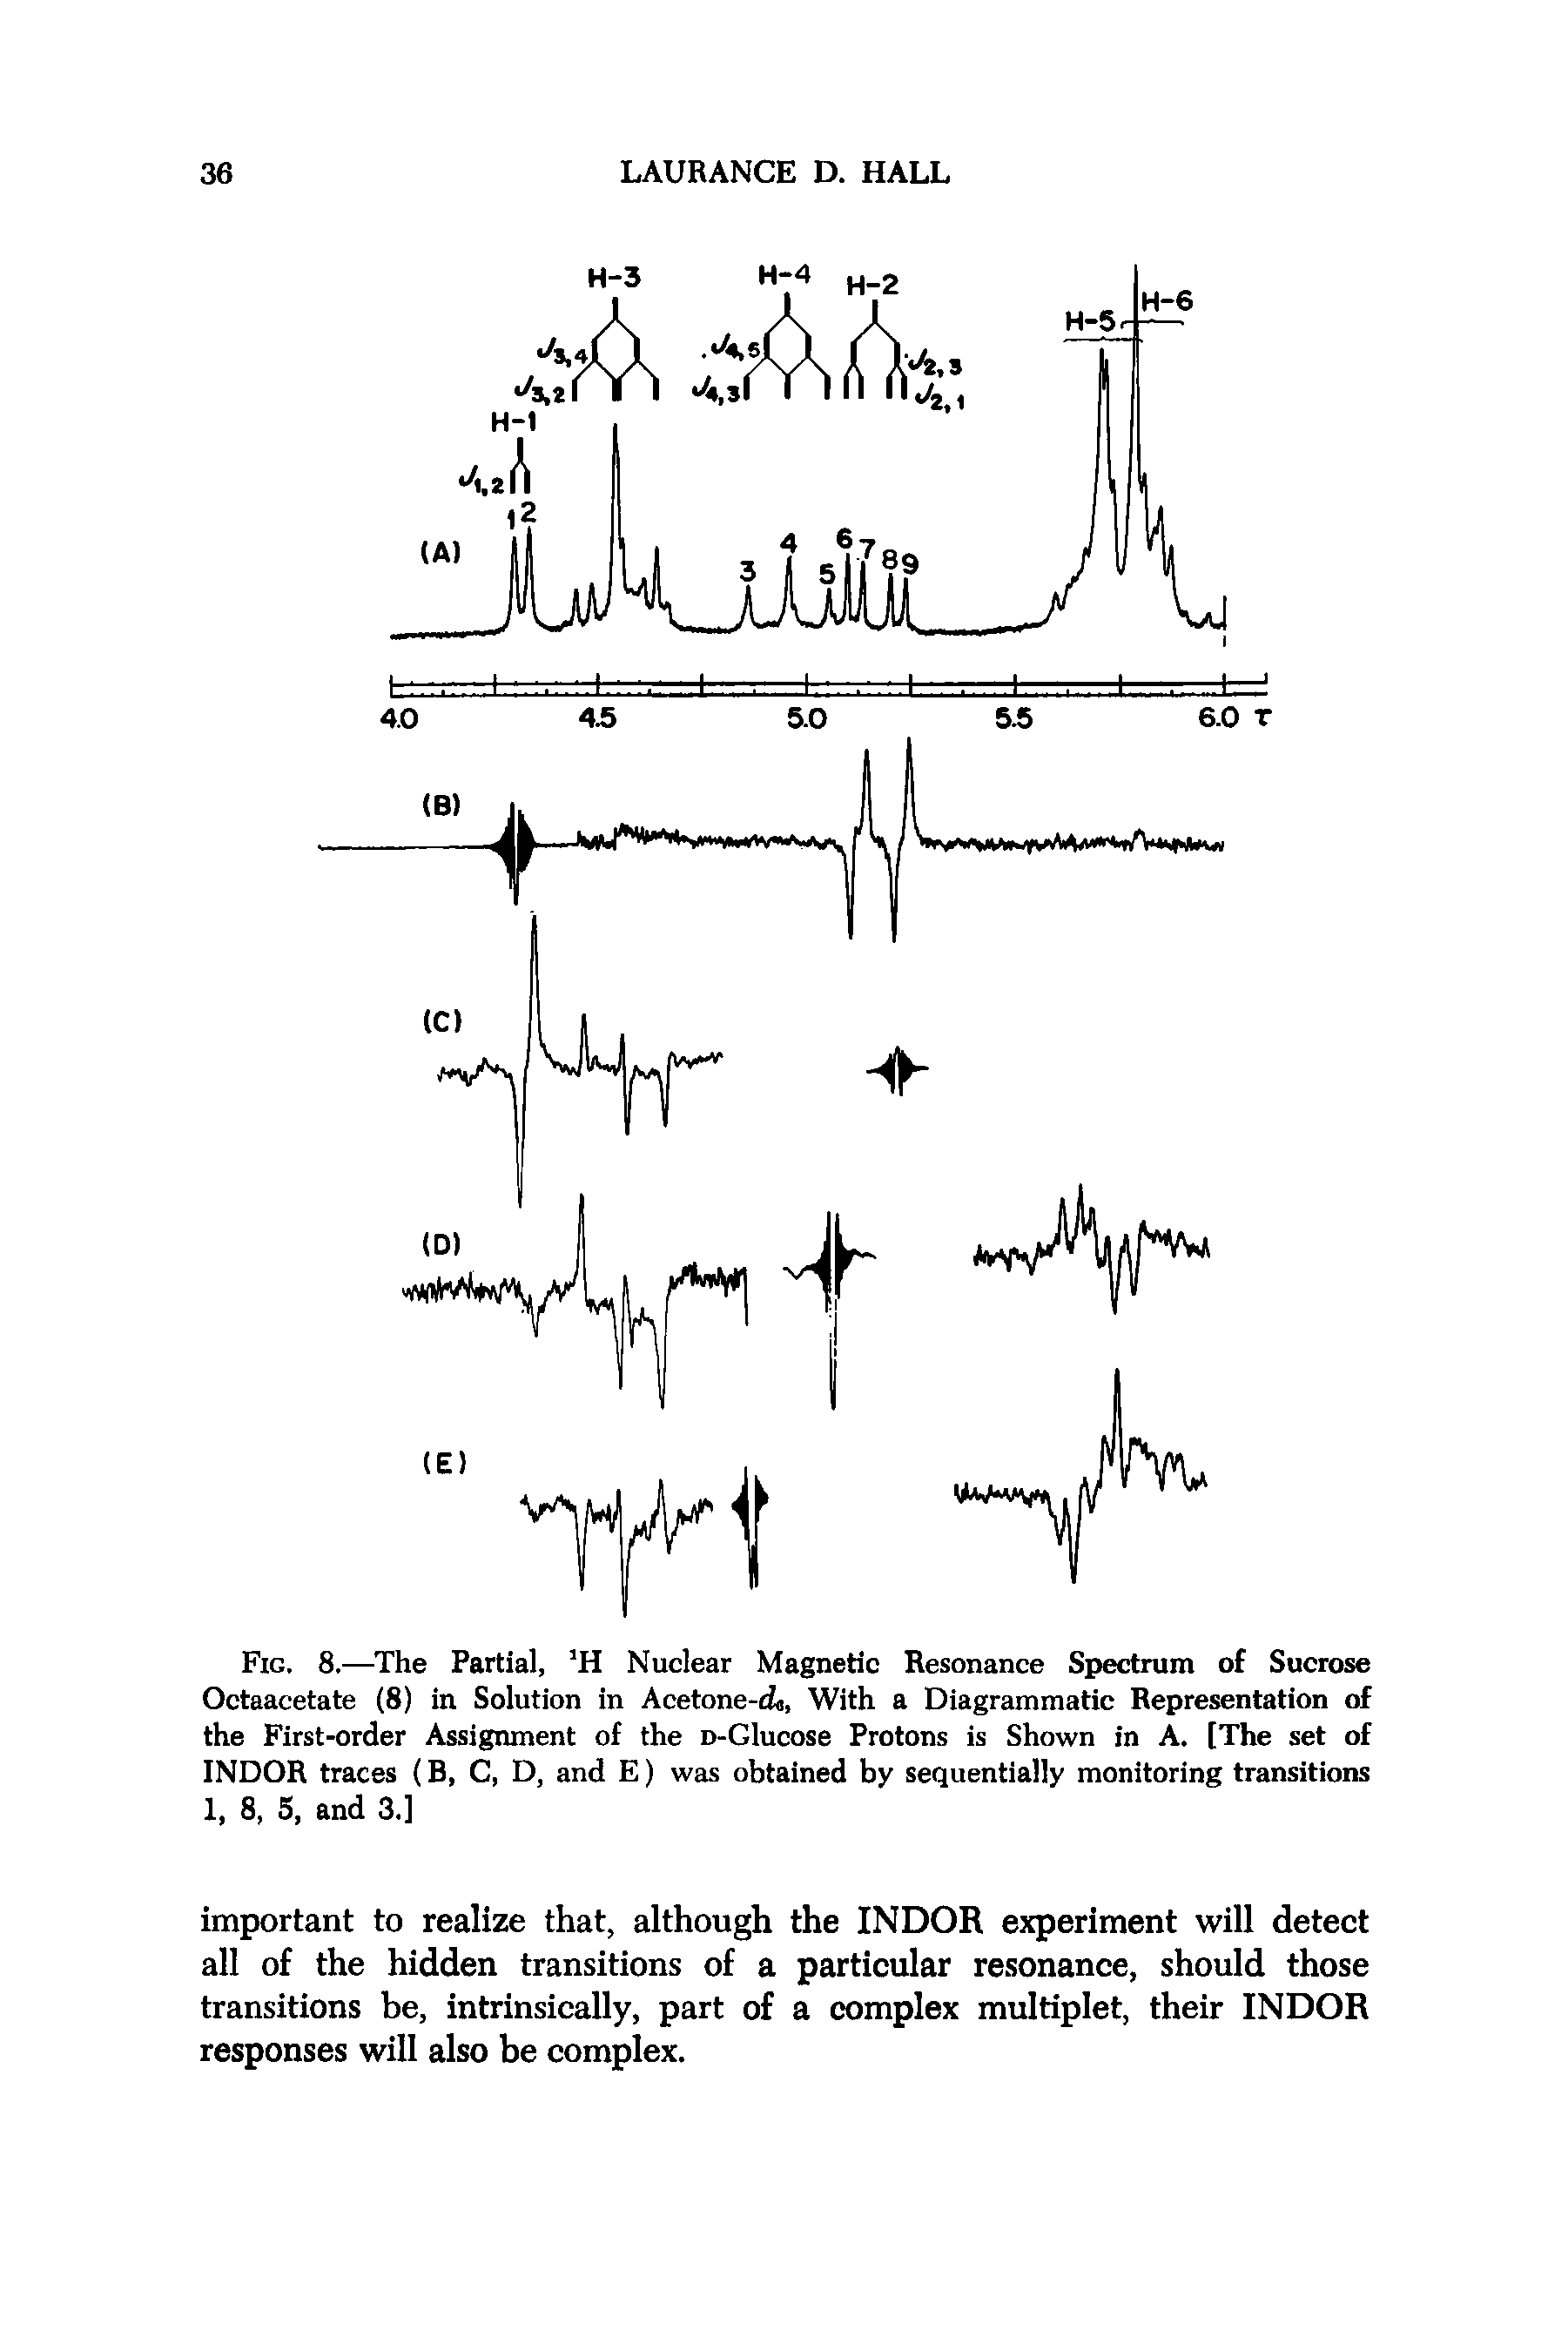 Fig. 8.—The Partial, H Nuclear Magnetic Resonance Spectrum of Sucrose Octaacetate (8) in Solution in Acetone-rid, With a Diagrammatic Representation of the First-order Assignment of the n-Glucose Protons is Shown in A. [The set of INDOR traces (B, C, D, and E) was obtained by sequentially monitoring transitions 1, 8, 5, and 3.]...